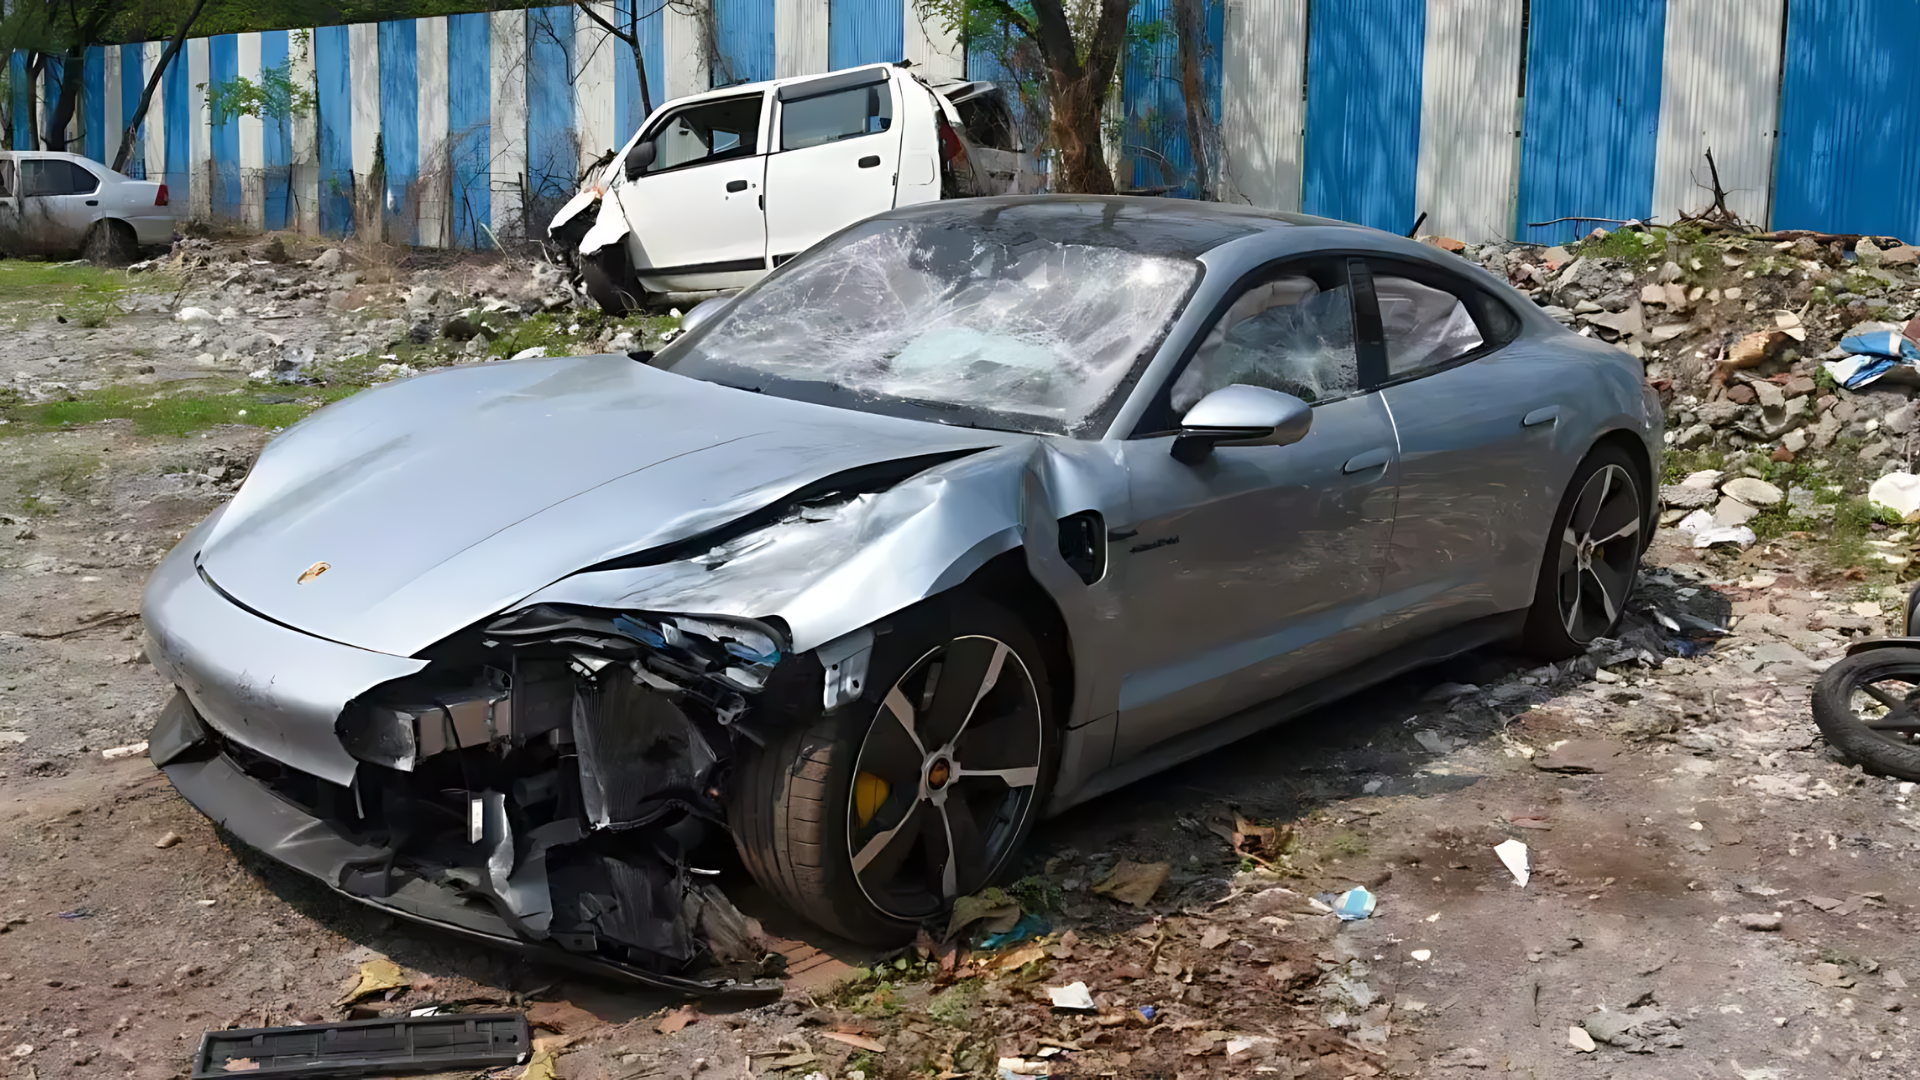 What Is The Connection Between The Family And The Pune Porsche Crash That Has Garnered Attention?